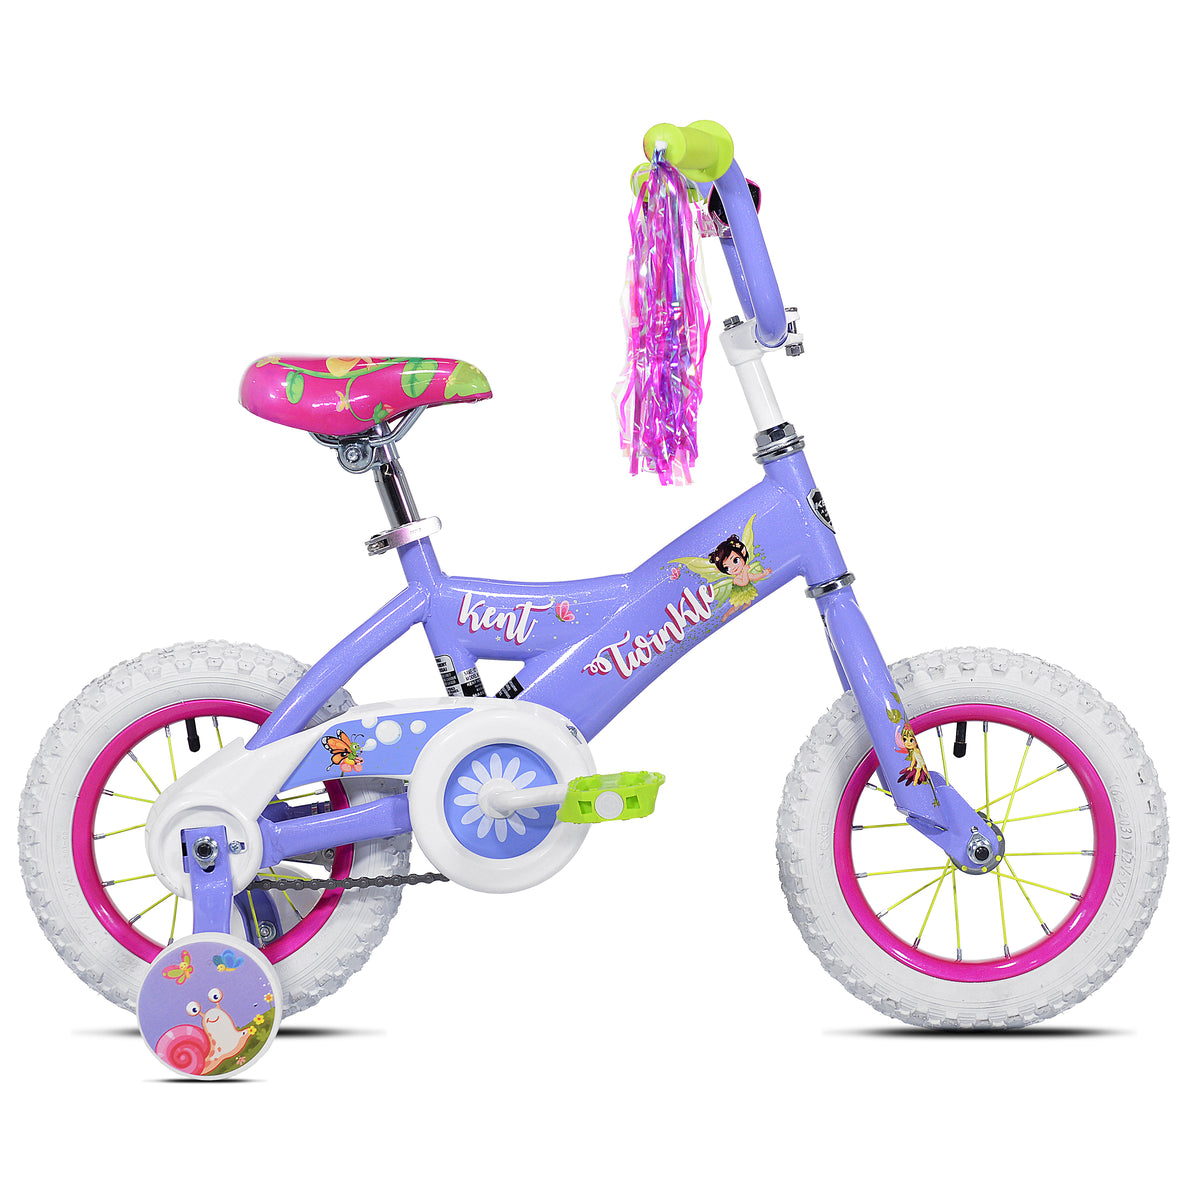 12" Kent Twinkle | Cruiser Bike for Kids Ages 2-4